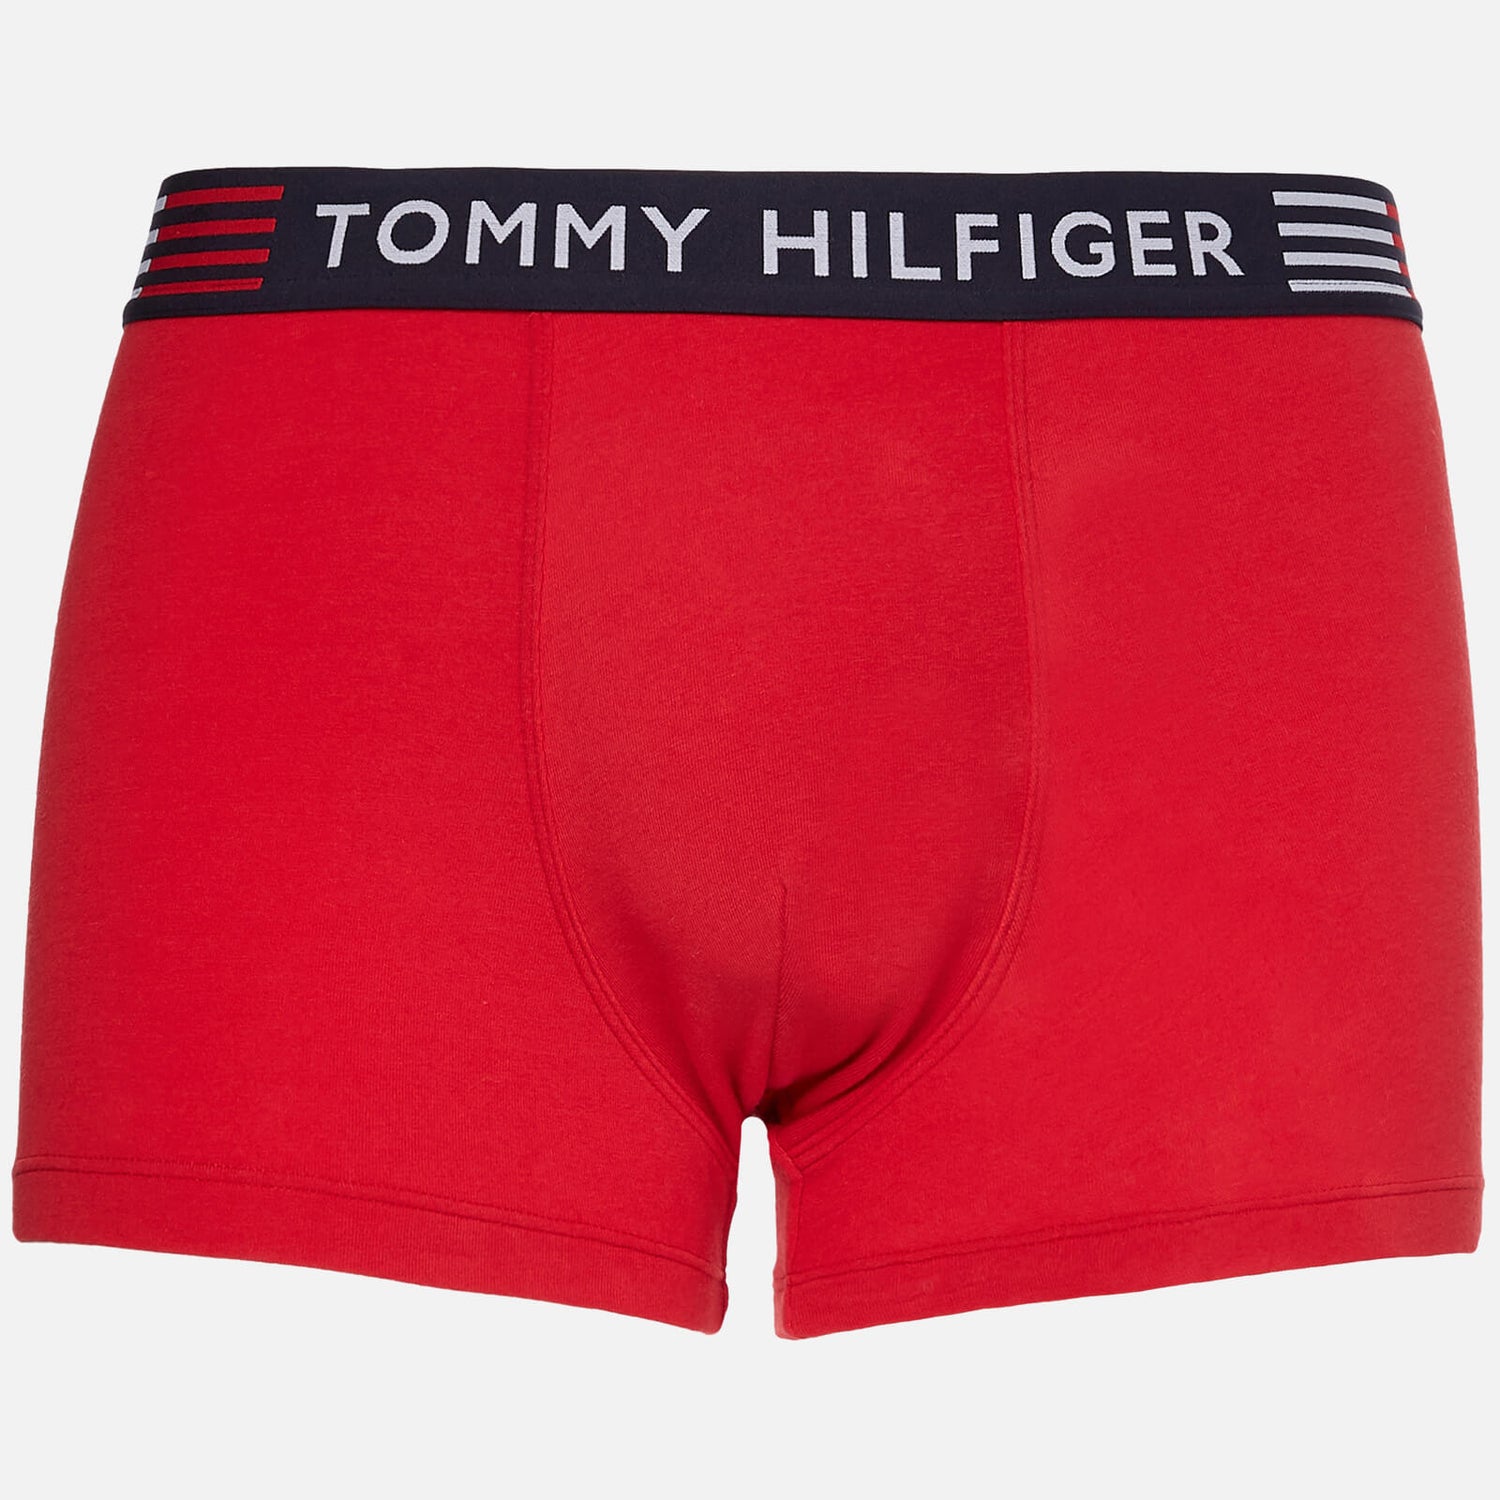 Tommy Hilfiger Men's Logo Waistband Trunks - Primary Red - S